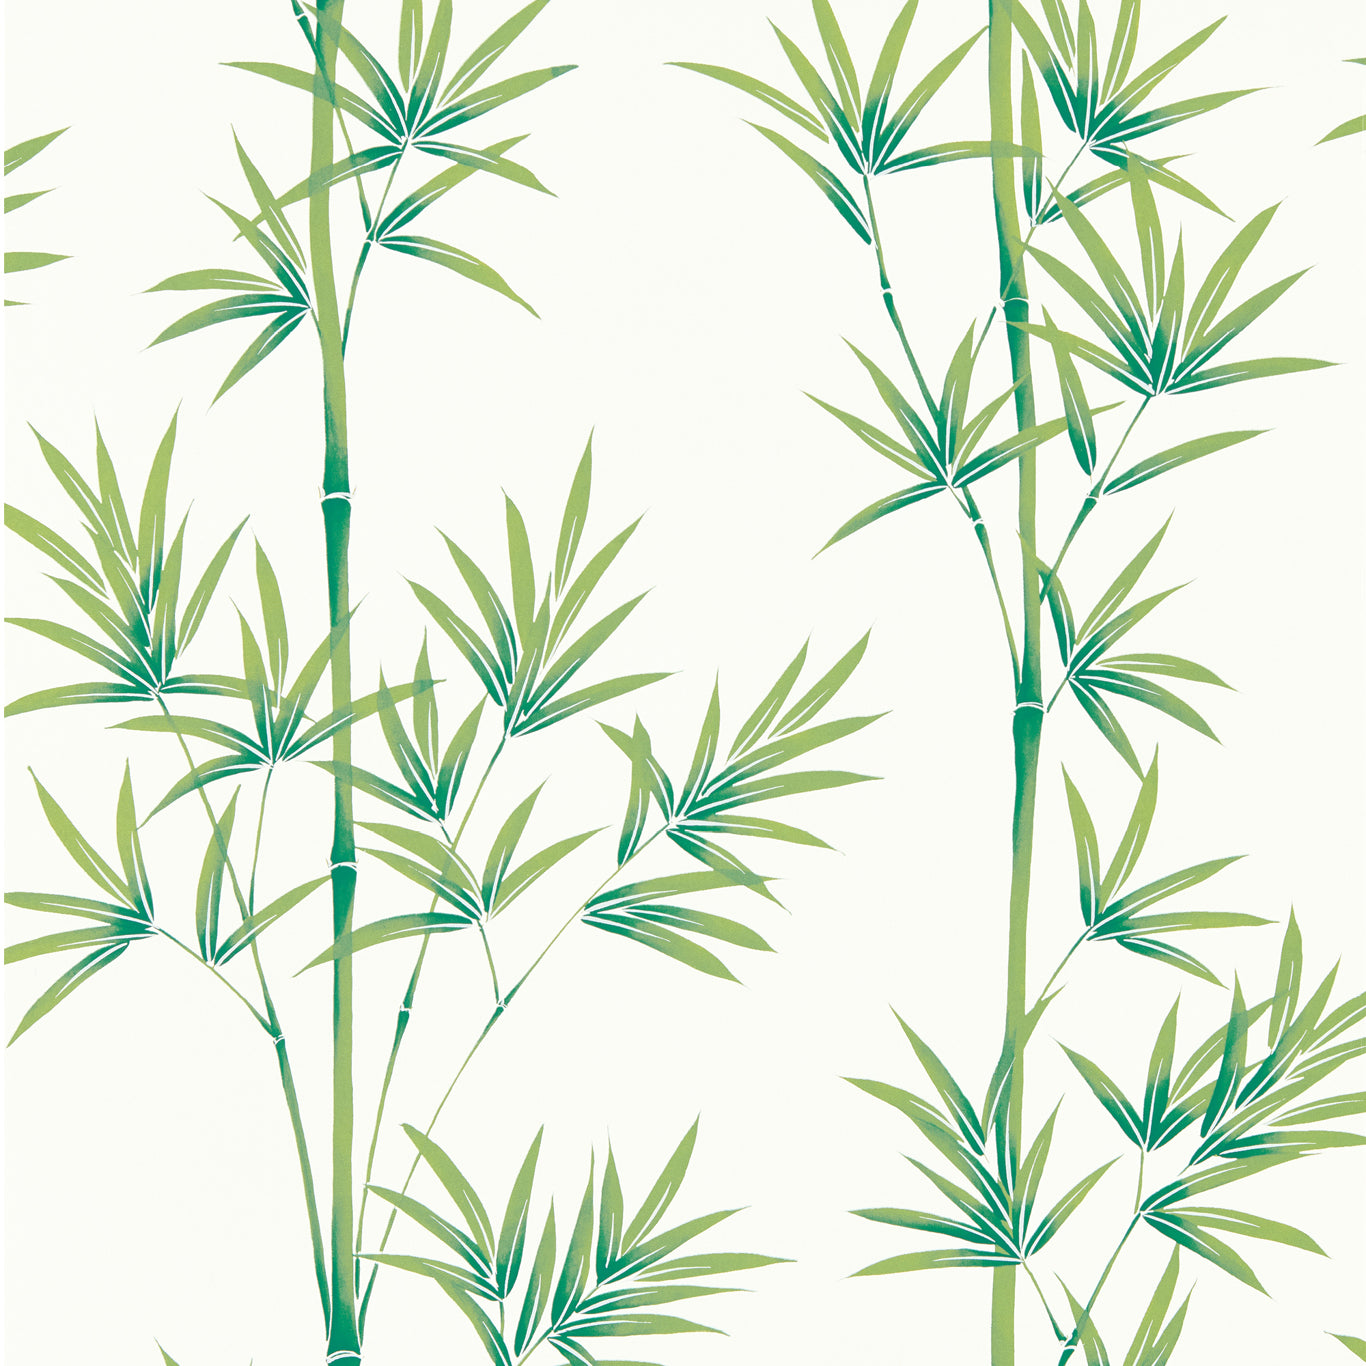 Isabella Porcelain/Bamboo Wallpaper HDHW112915 by Harlequin